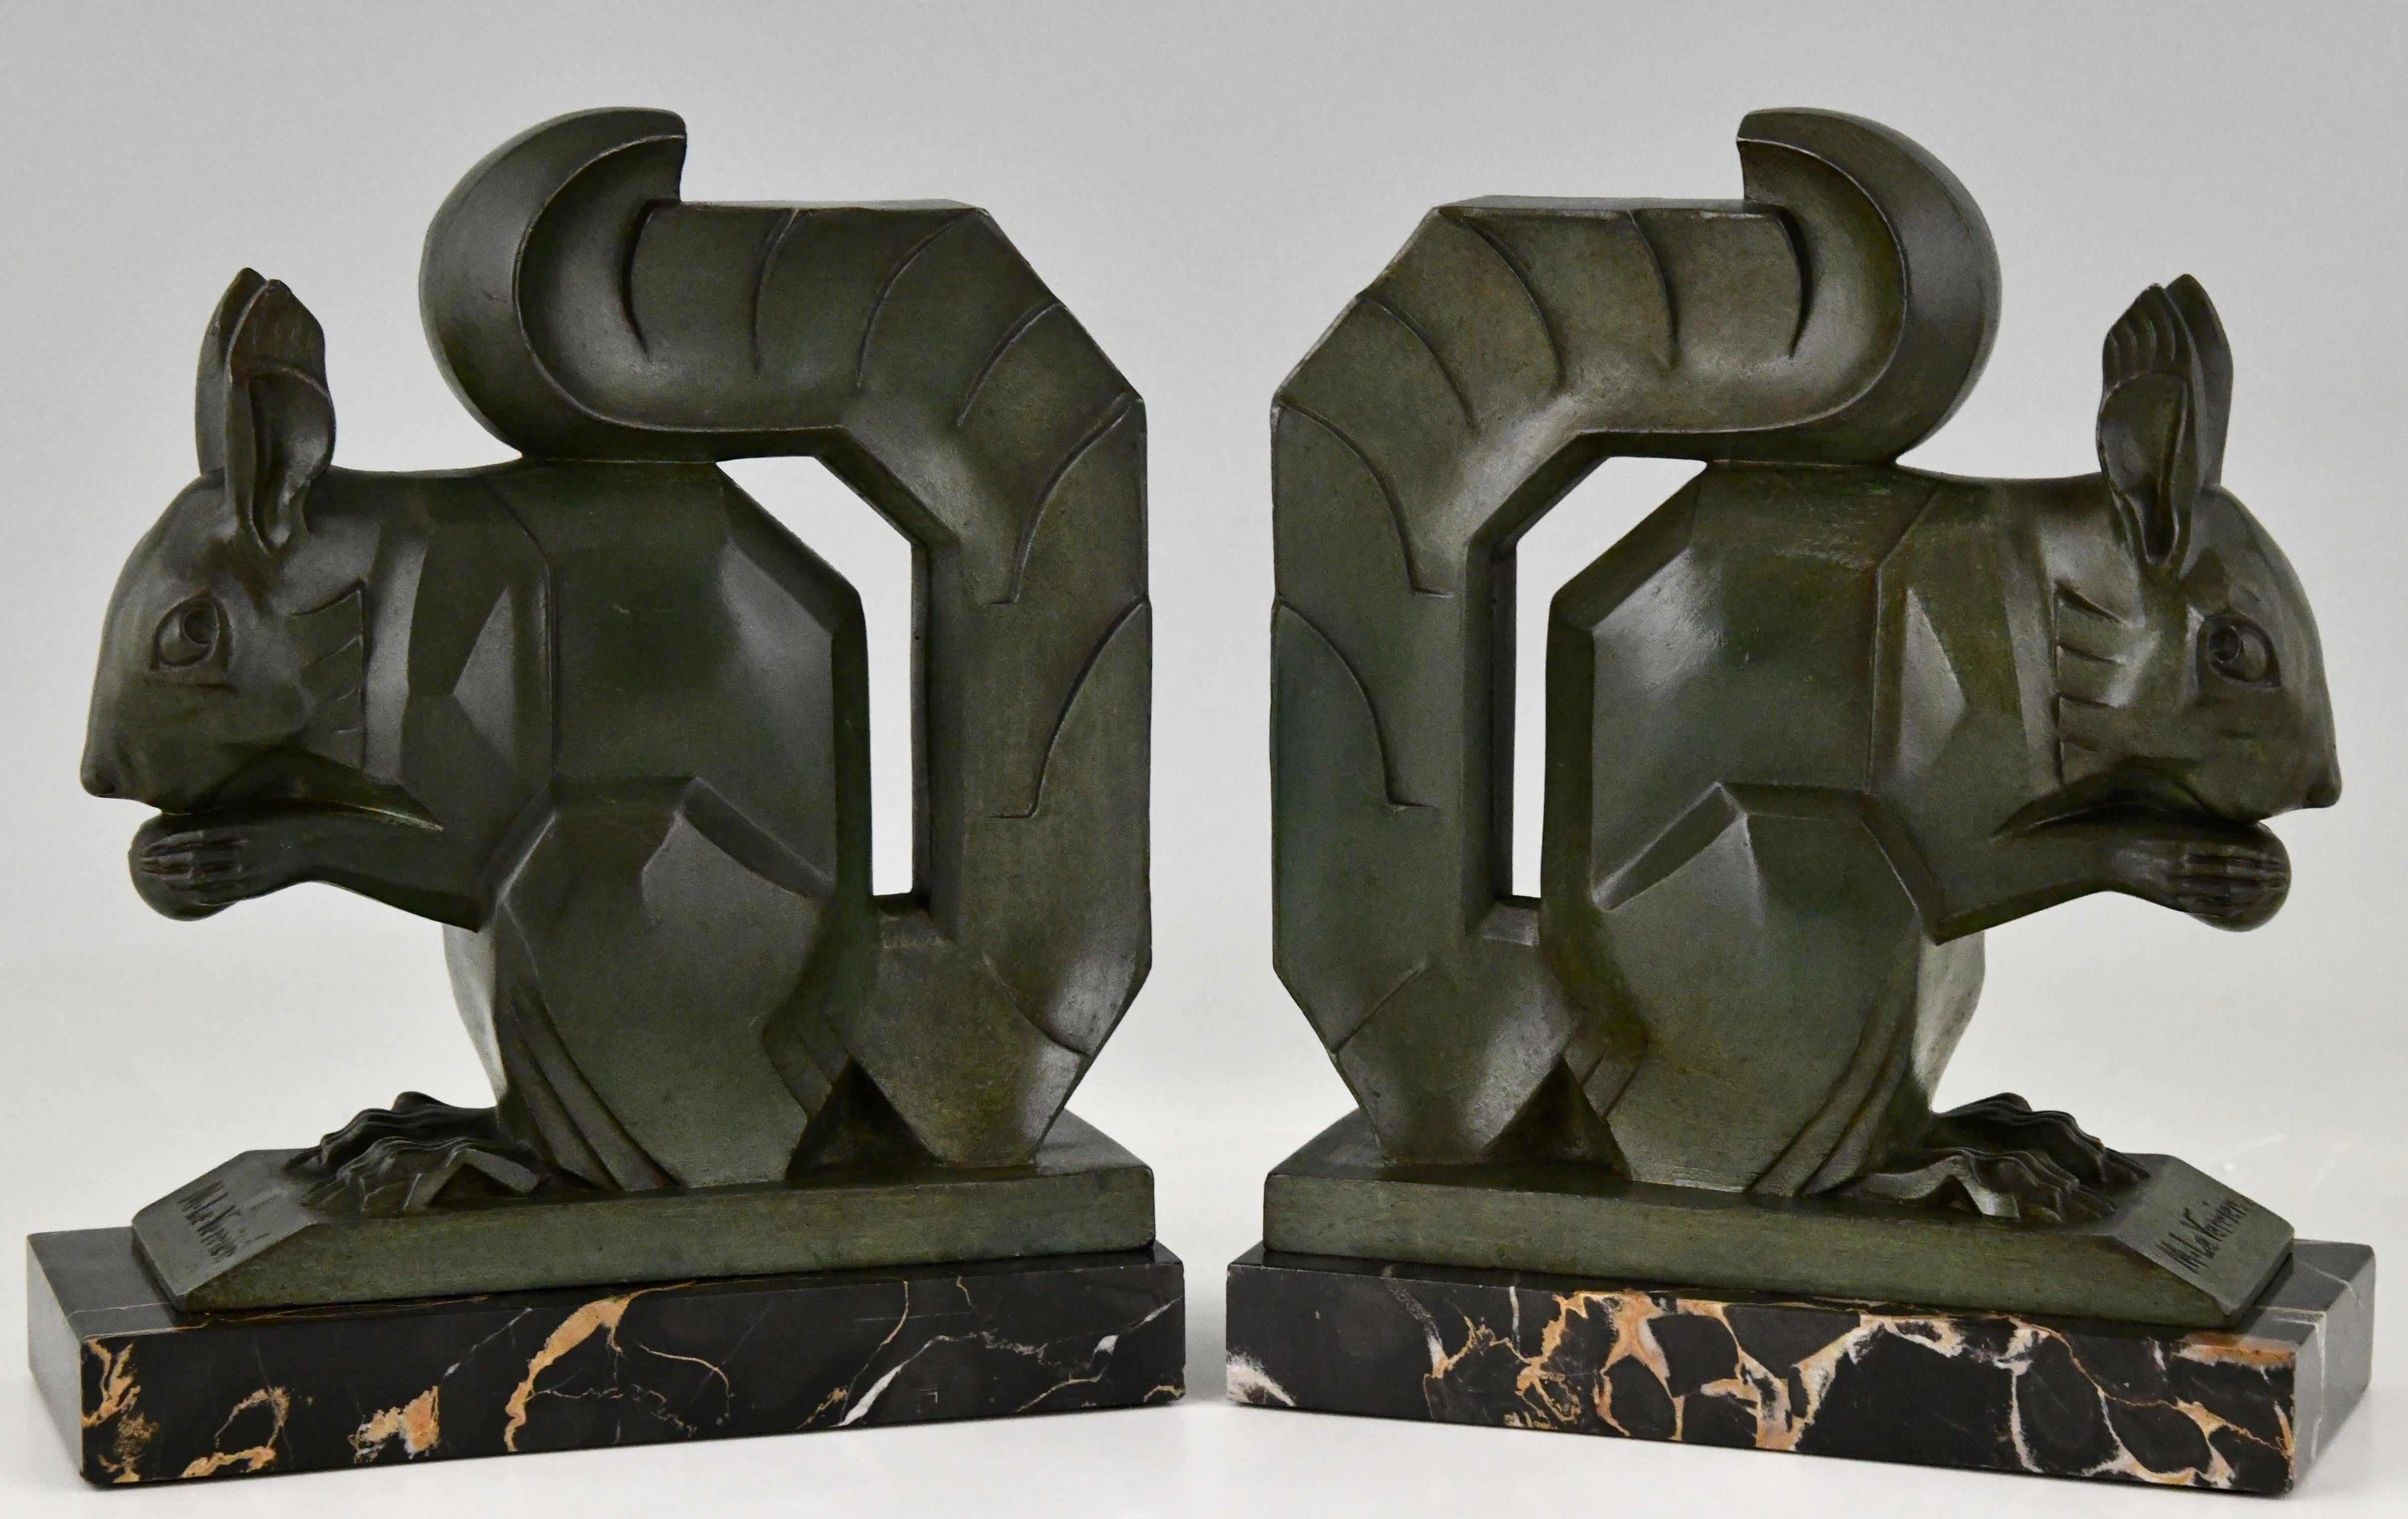 Tall pair of Art Deco squirrel bookends by Max Le Verrier Art metal, dark green patina. Portor marble bases. France 1930. This size is very hard to find. 
Literature:
Art Deco sculpture by Victor Arwas, Academy. Bronzes, sculptors and founders by